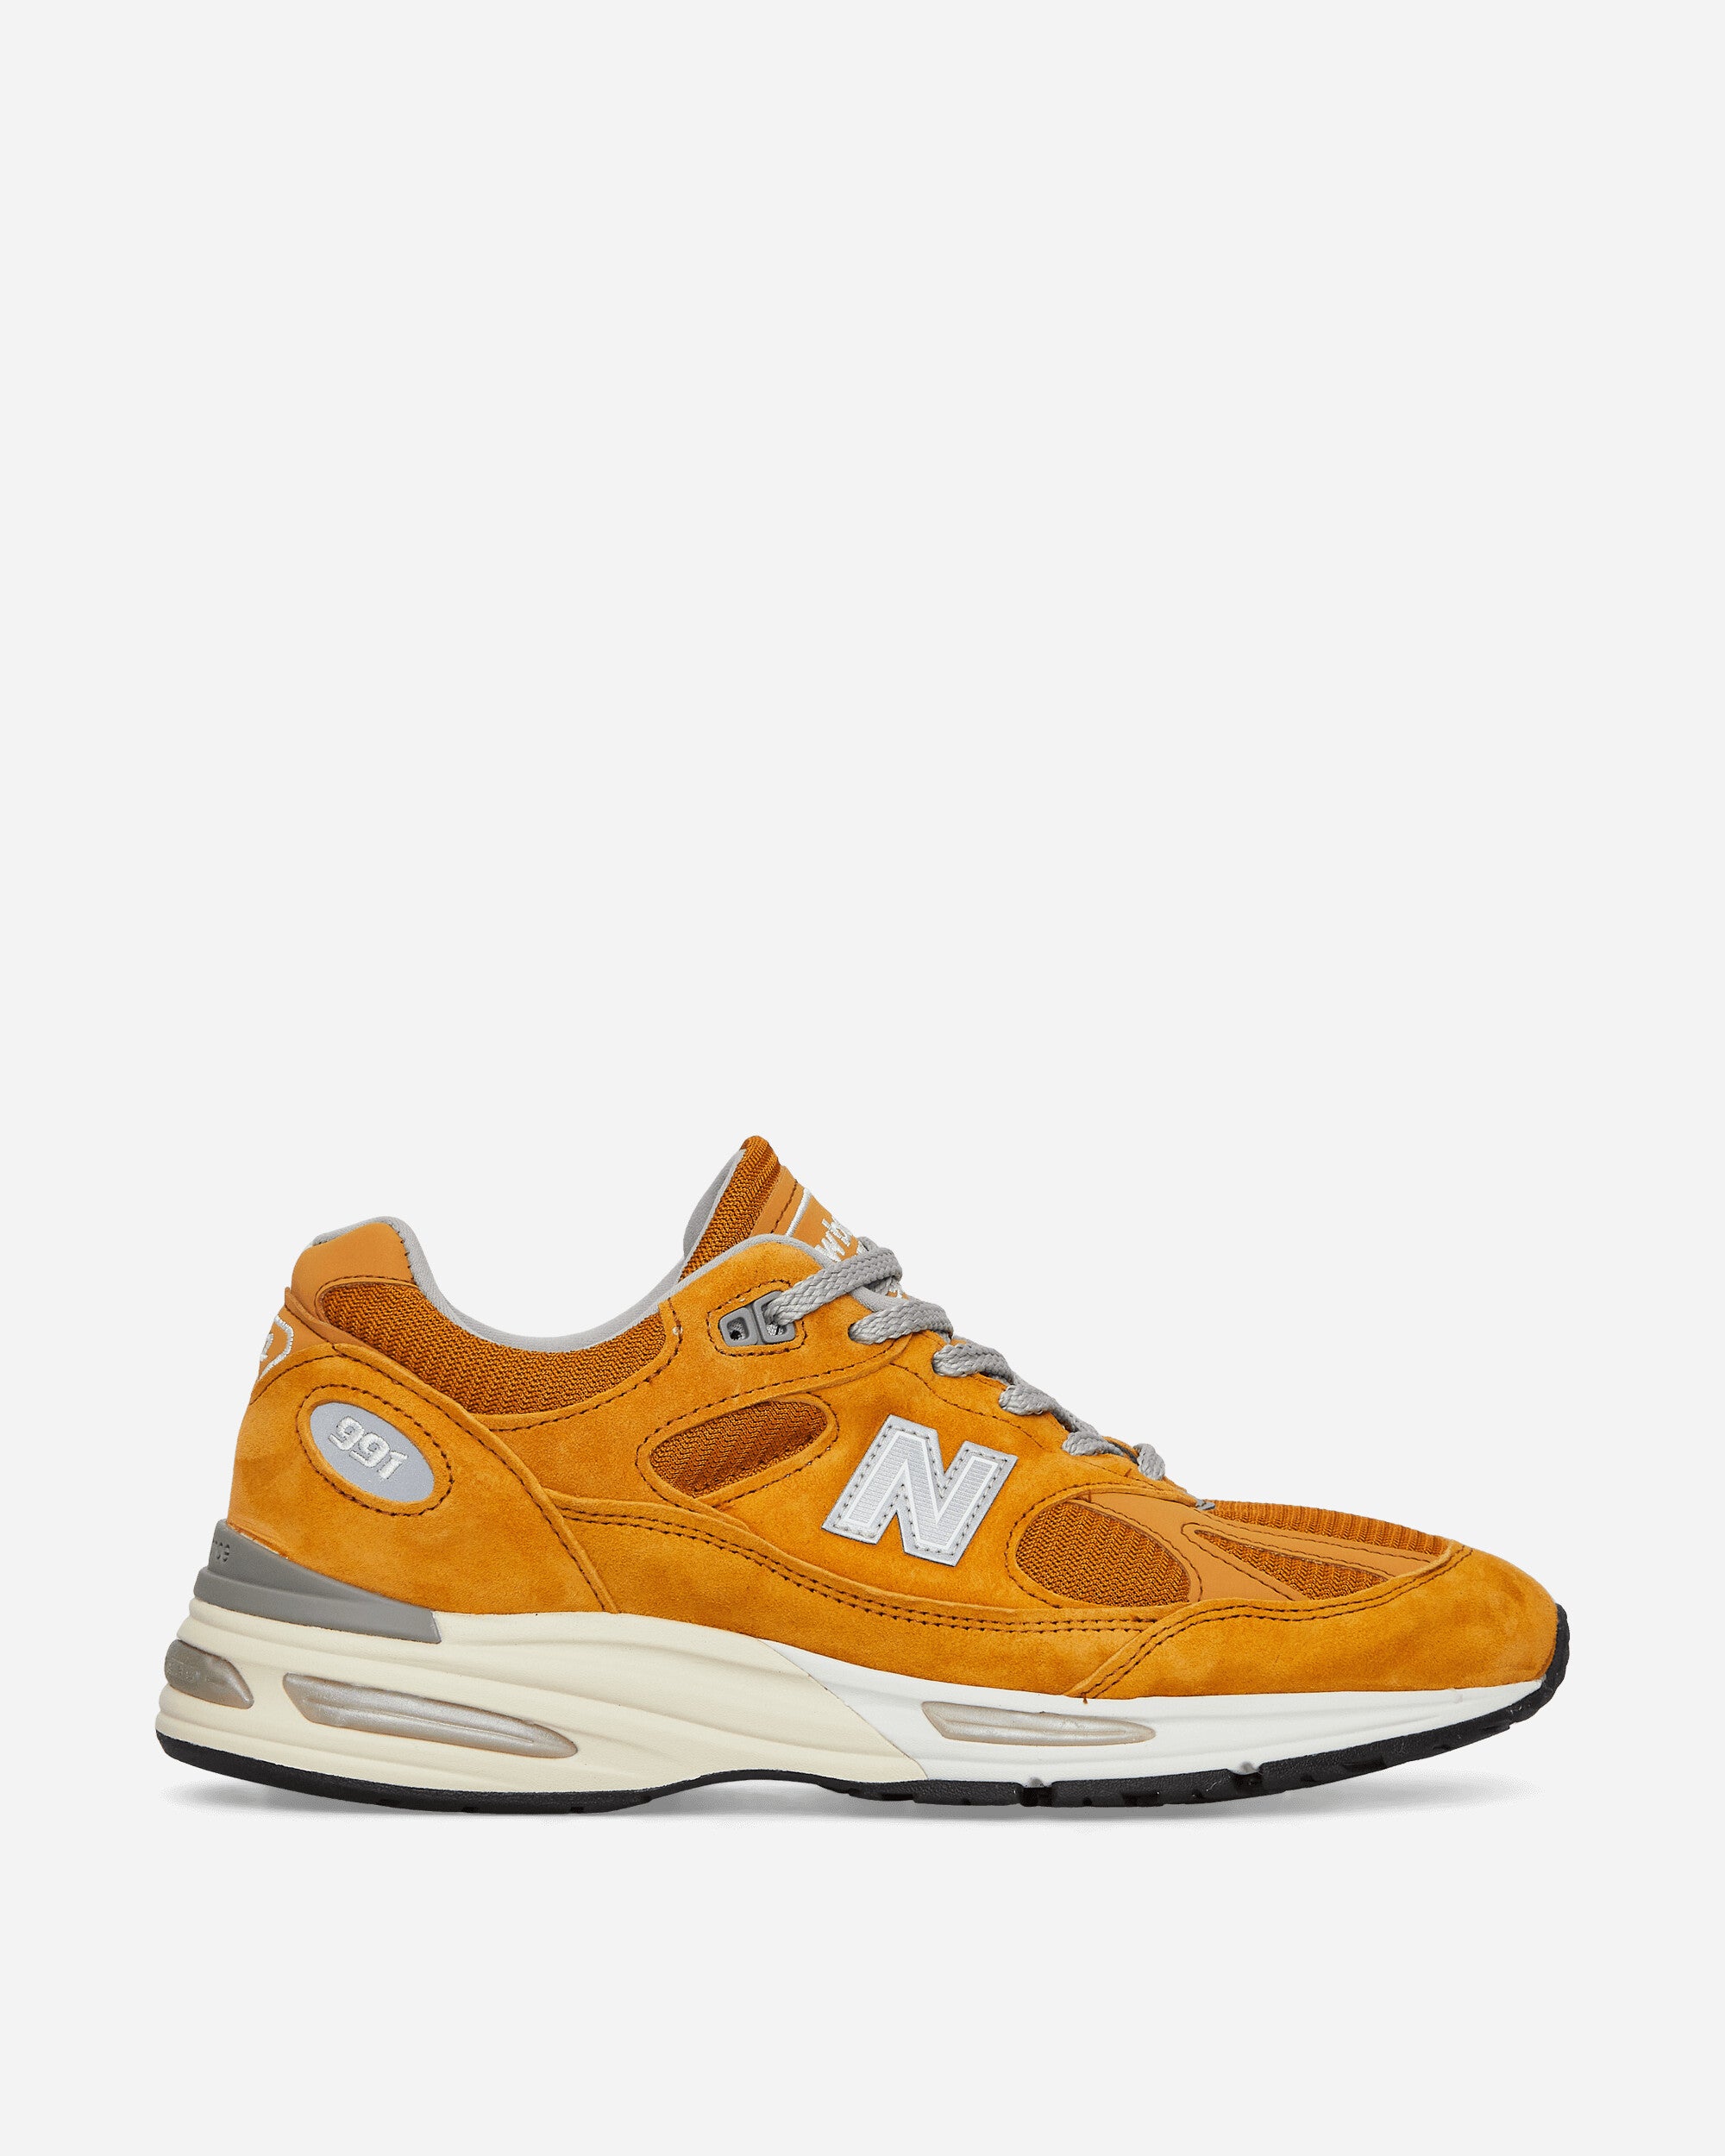 New Balance Made in UK 991v2 - Yellow 9